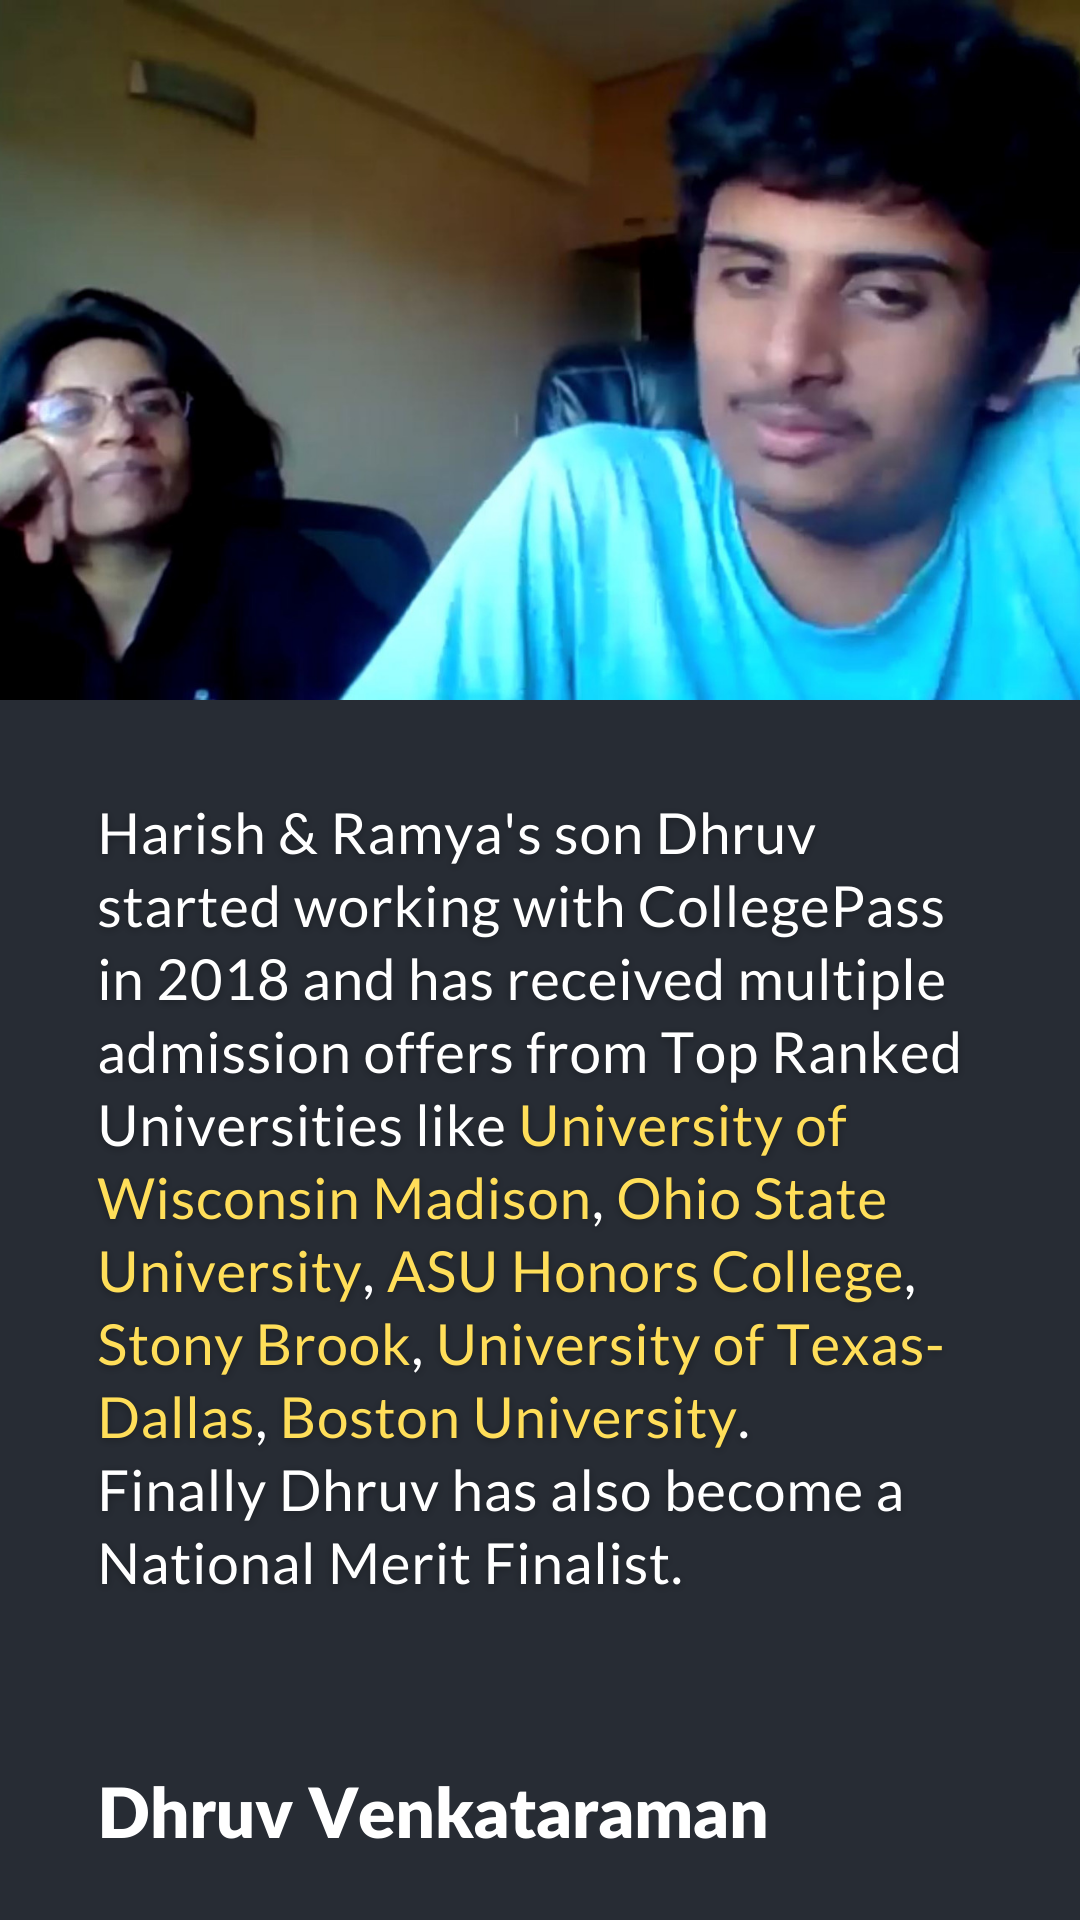 Dhruv has been admitted to Wisconsin Madison, Ohio State, Stony Brook, Boston University, etc.